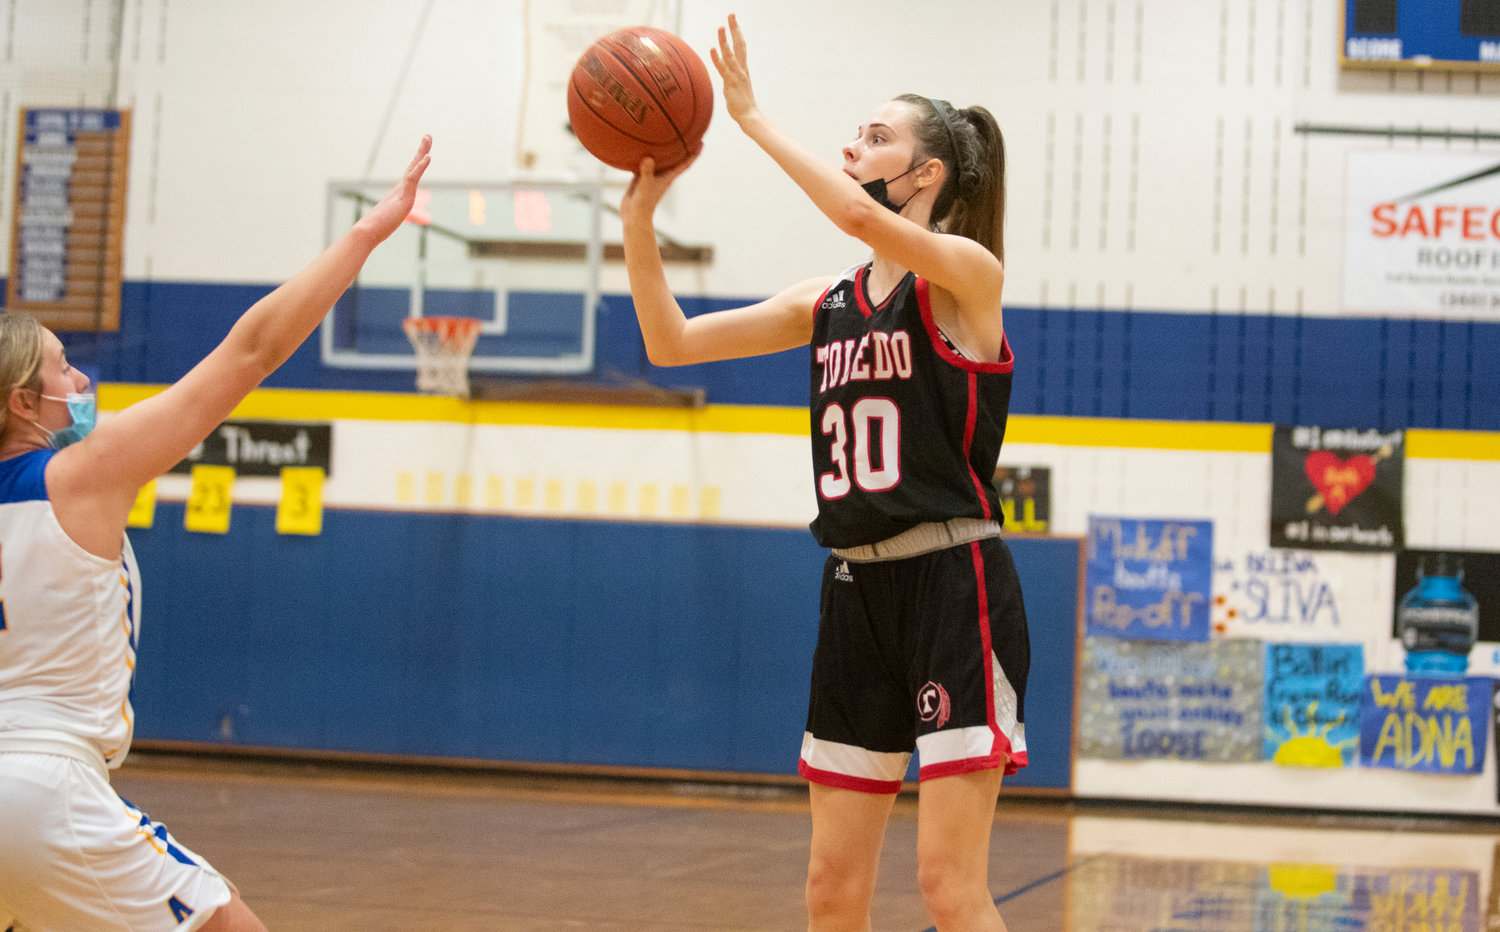 Toledo junior Marina Smith (30) drills one of her five 3-pointers on the day against Adna on Thursday.